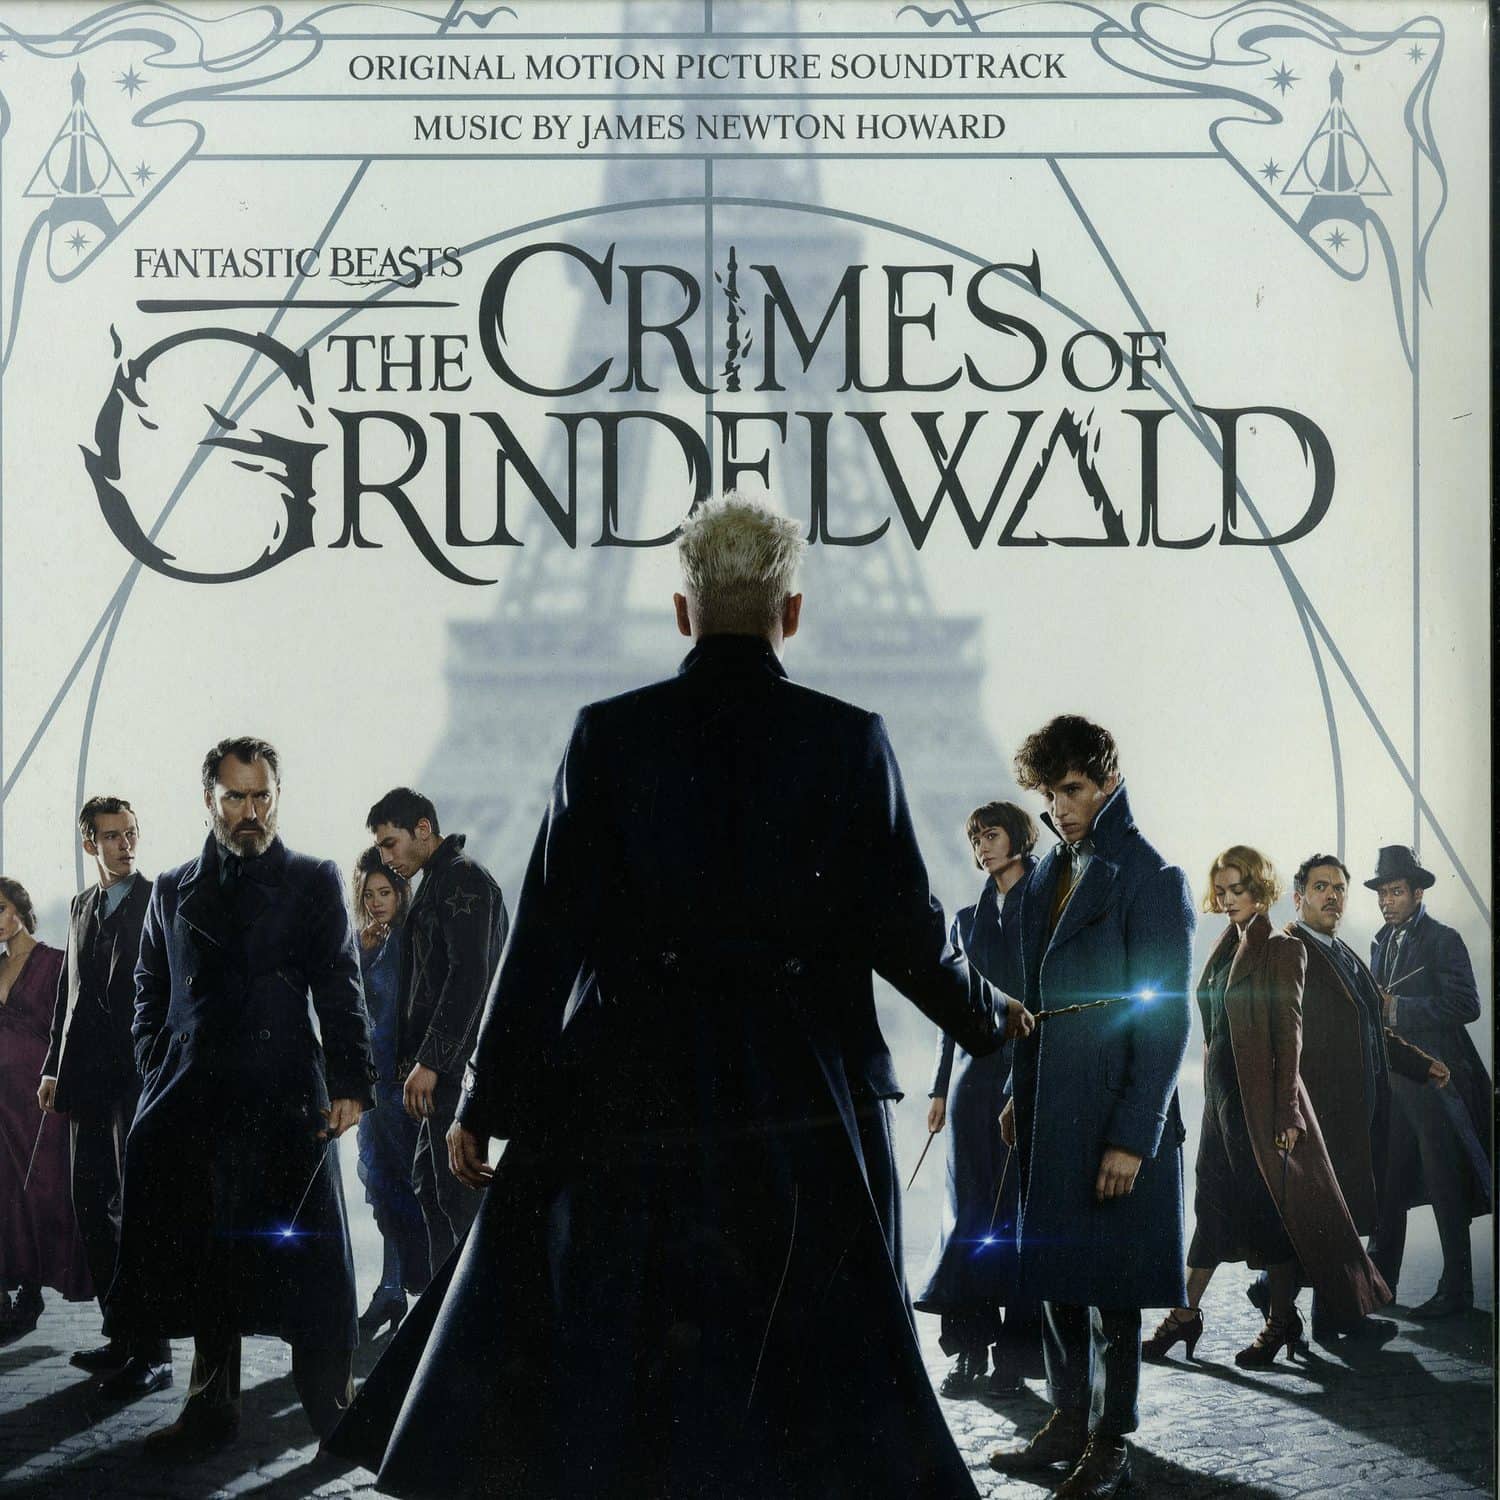 James Newton Howard - FANTASTIC BEASTS: THE CRIMES OF GRINDELWALD O.S.T. 